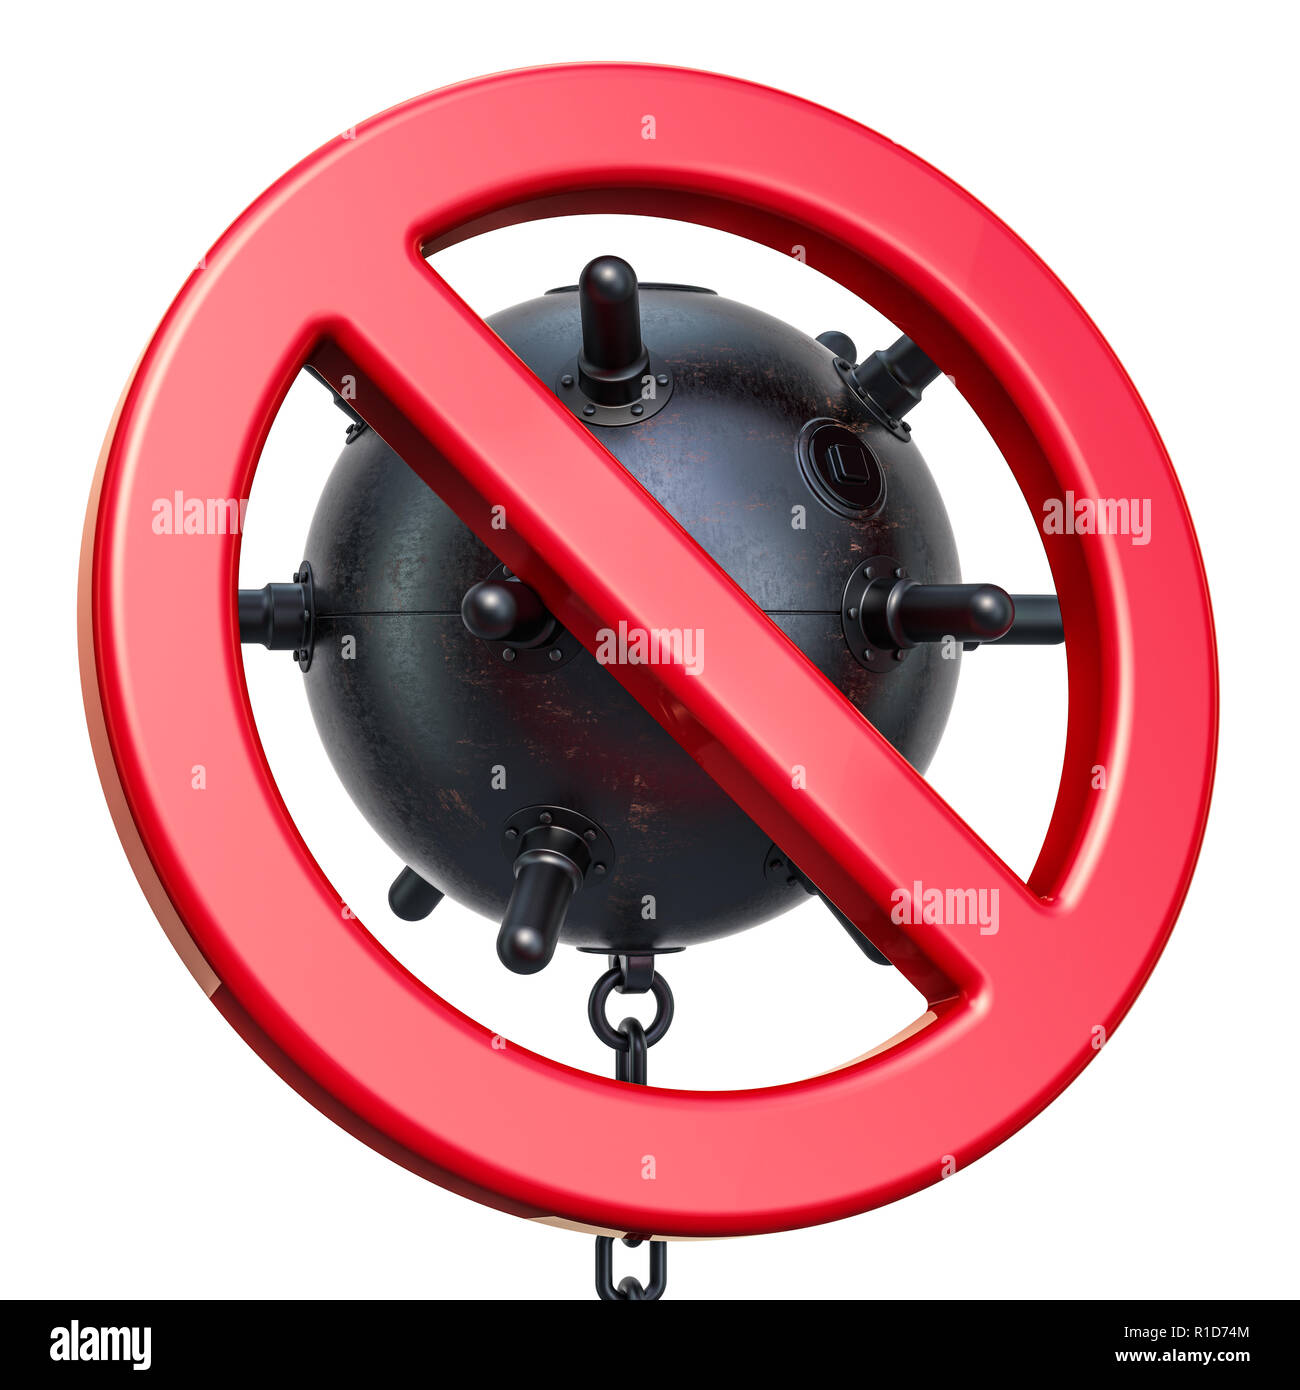 Forbidden sign naval mine, 3D rendering isolated on white background Stock Photo